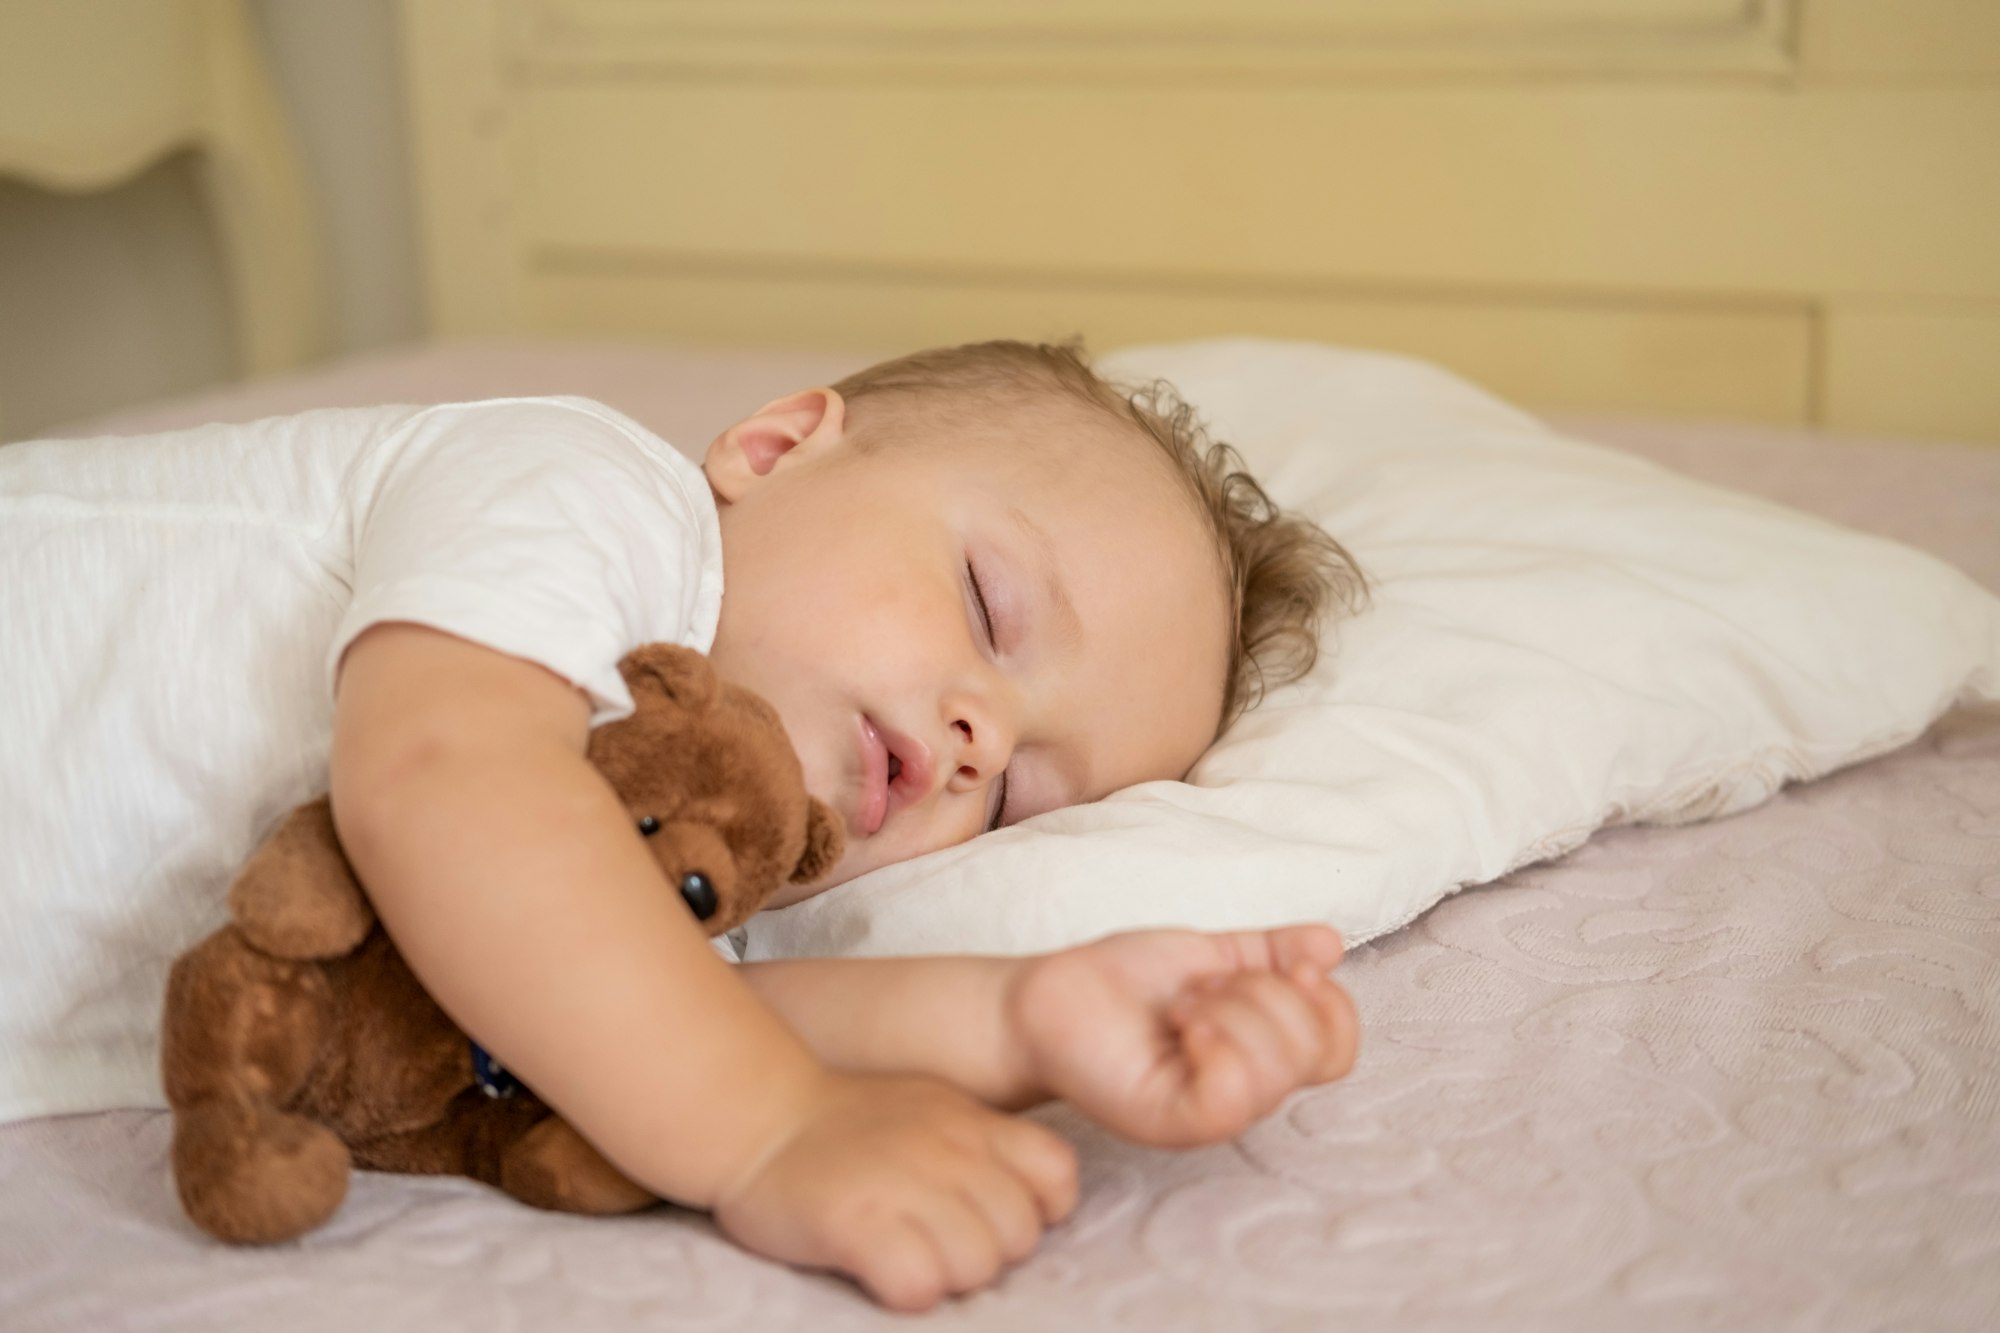 funny baby boy sleeping on bed at home. child hugging teddy bear